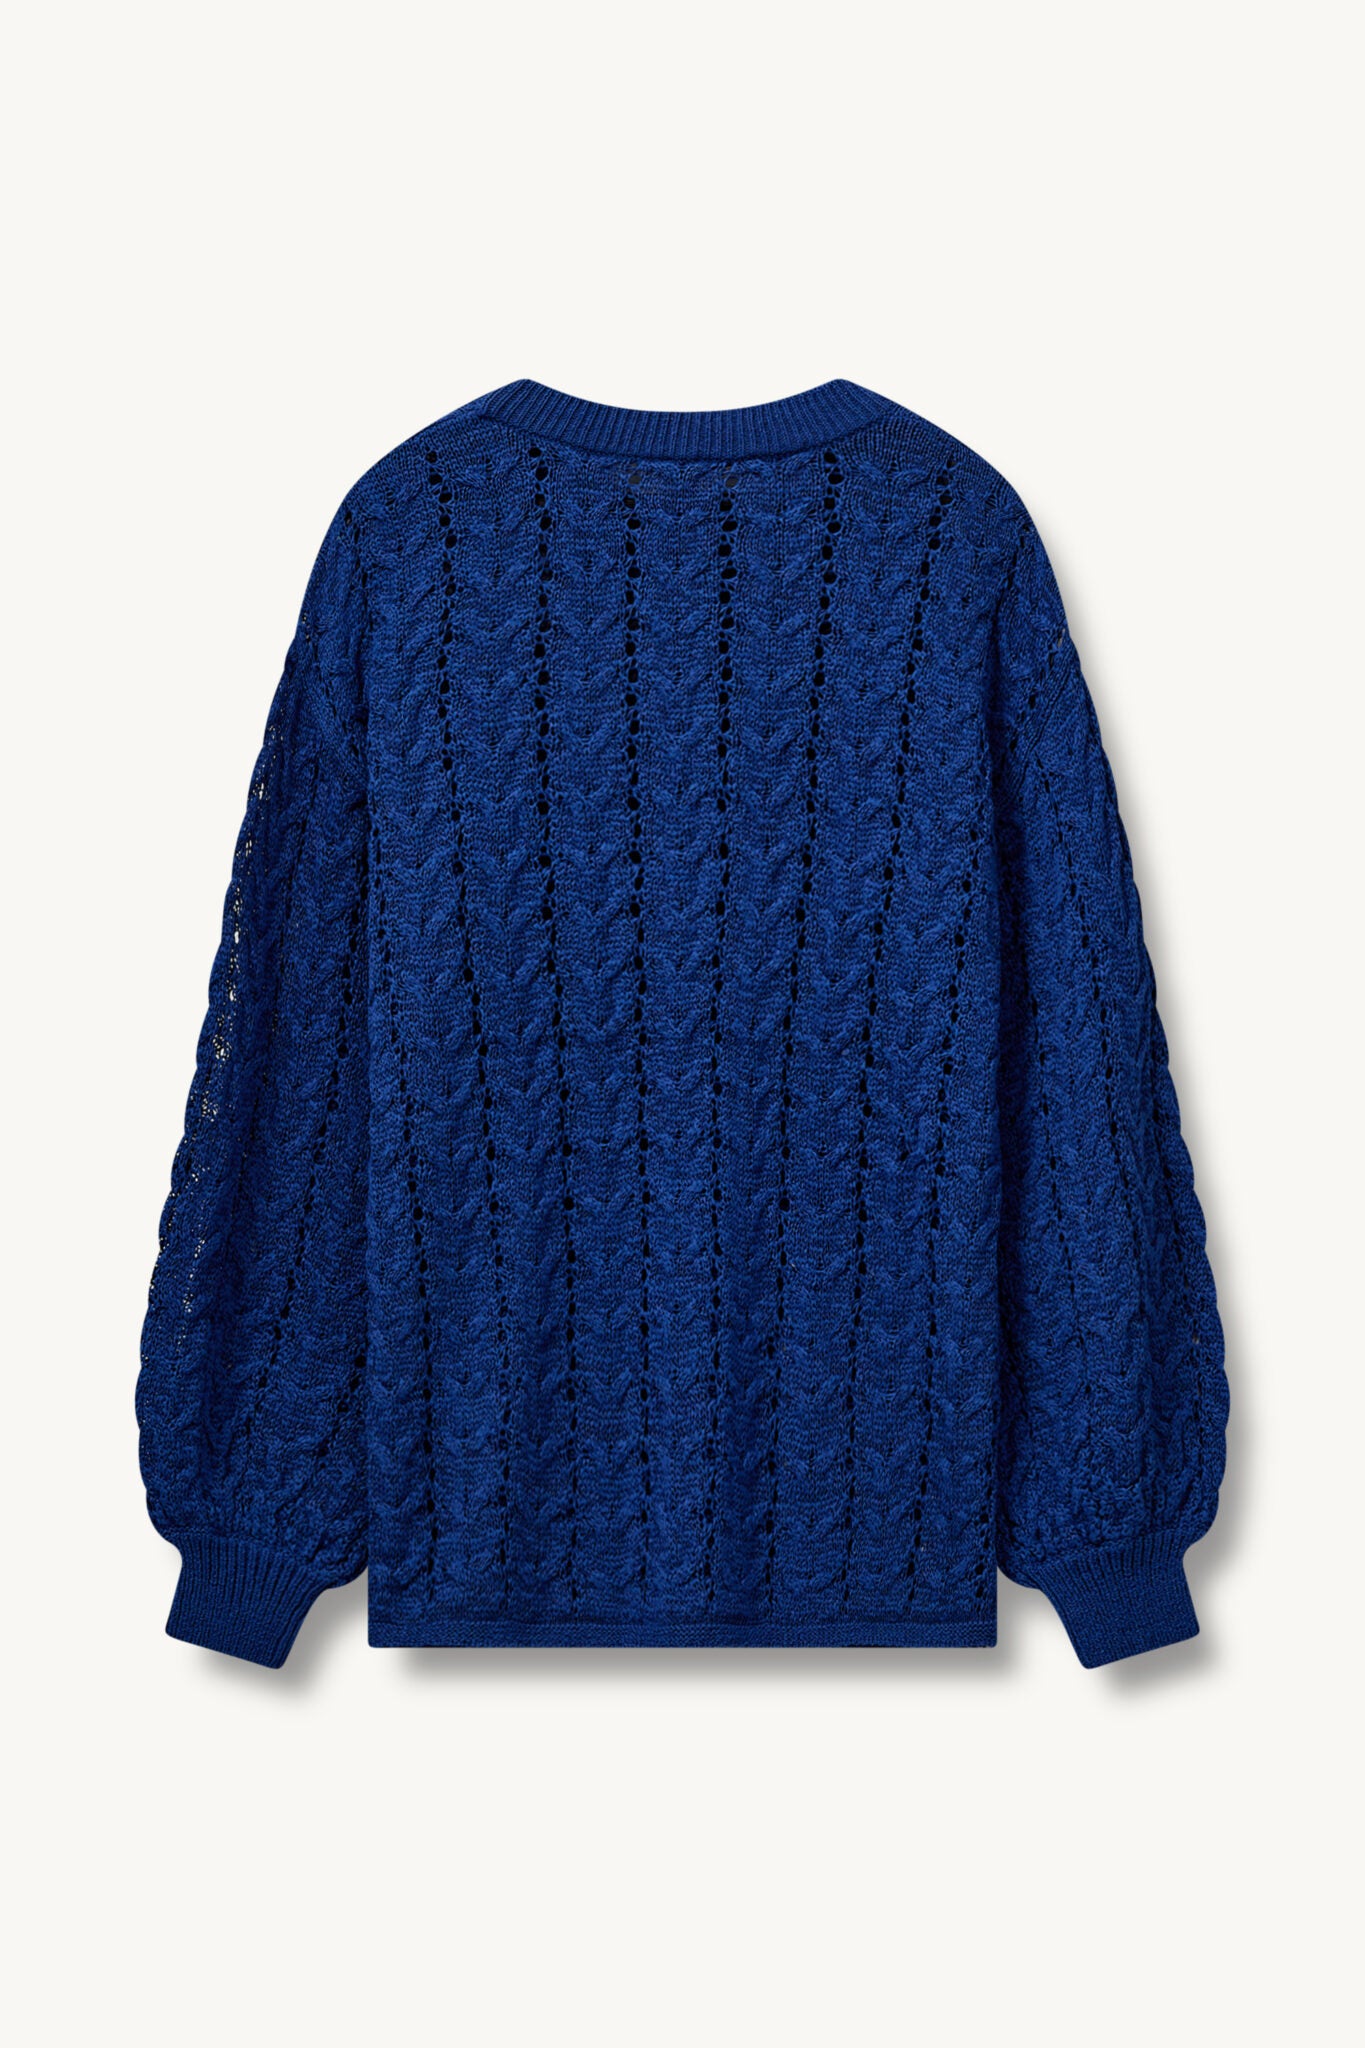 The Garment Donna Sweater